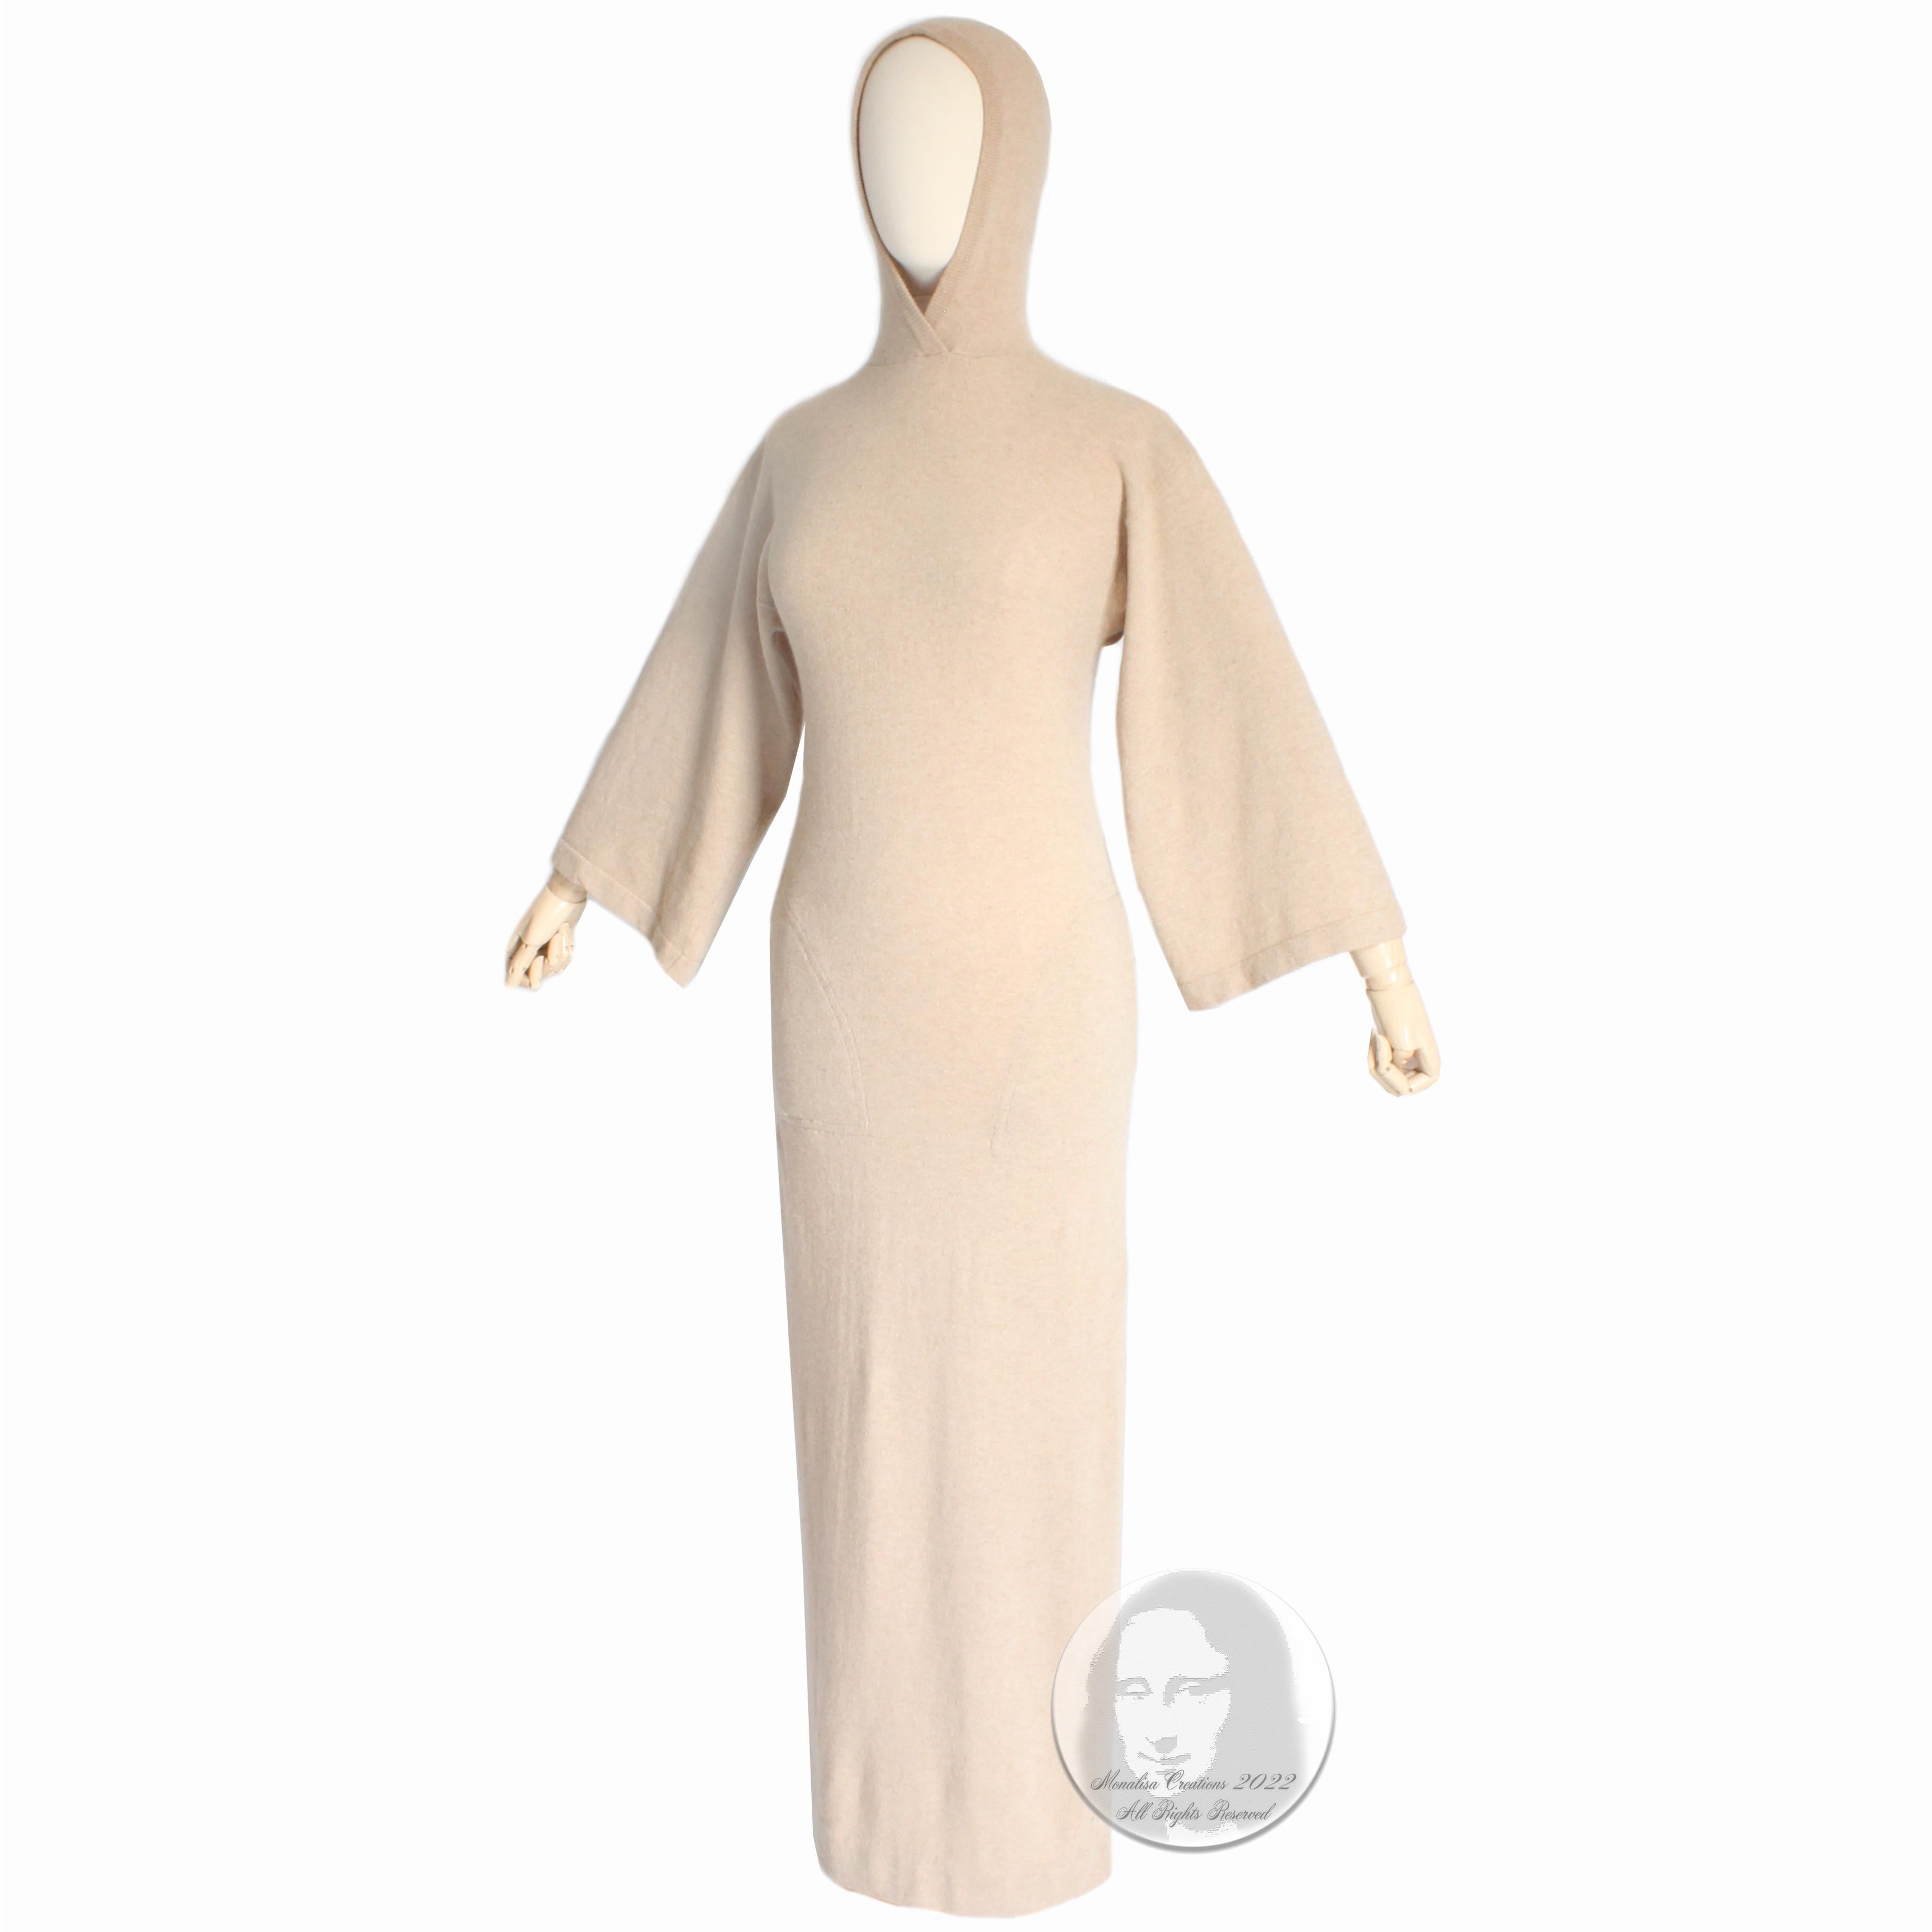 SUPER RARE Bonnie Cashin dress with hood, likely made in the early 70s. Made from a gorgeous oatmeal colored cashmere knit, this rare dress features Kimono-style sleeves, half-moon pockets at each hip and a hood!   Incredibly soft and fabulously